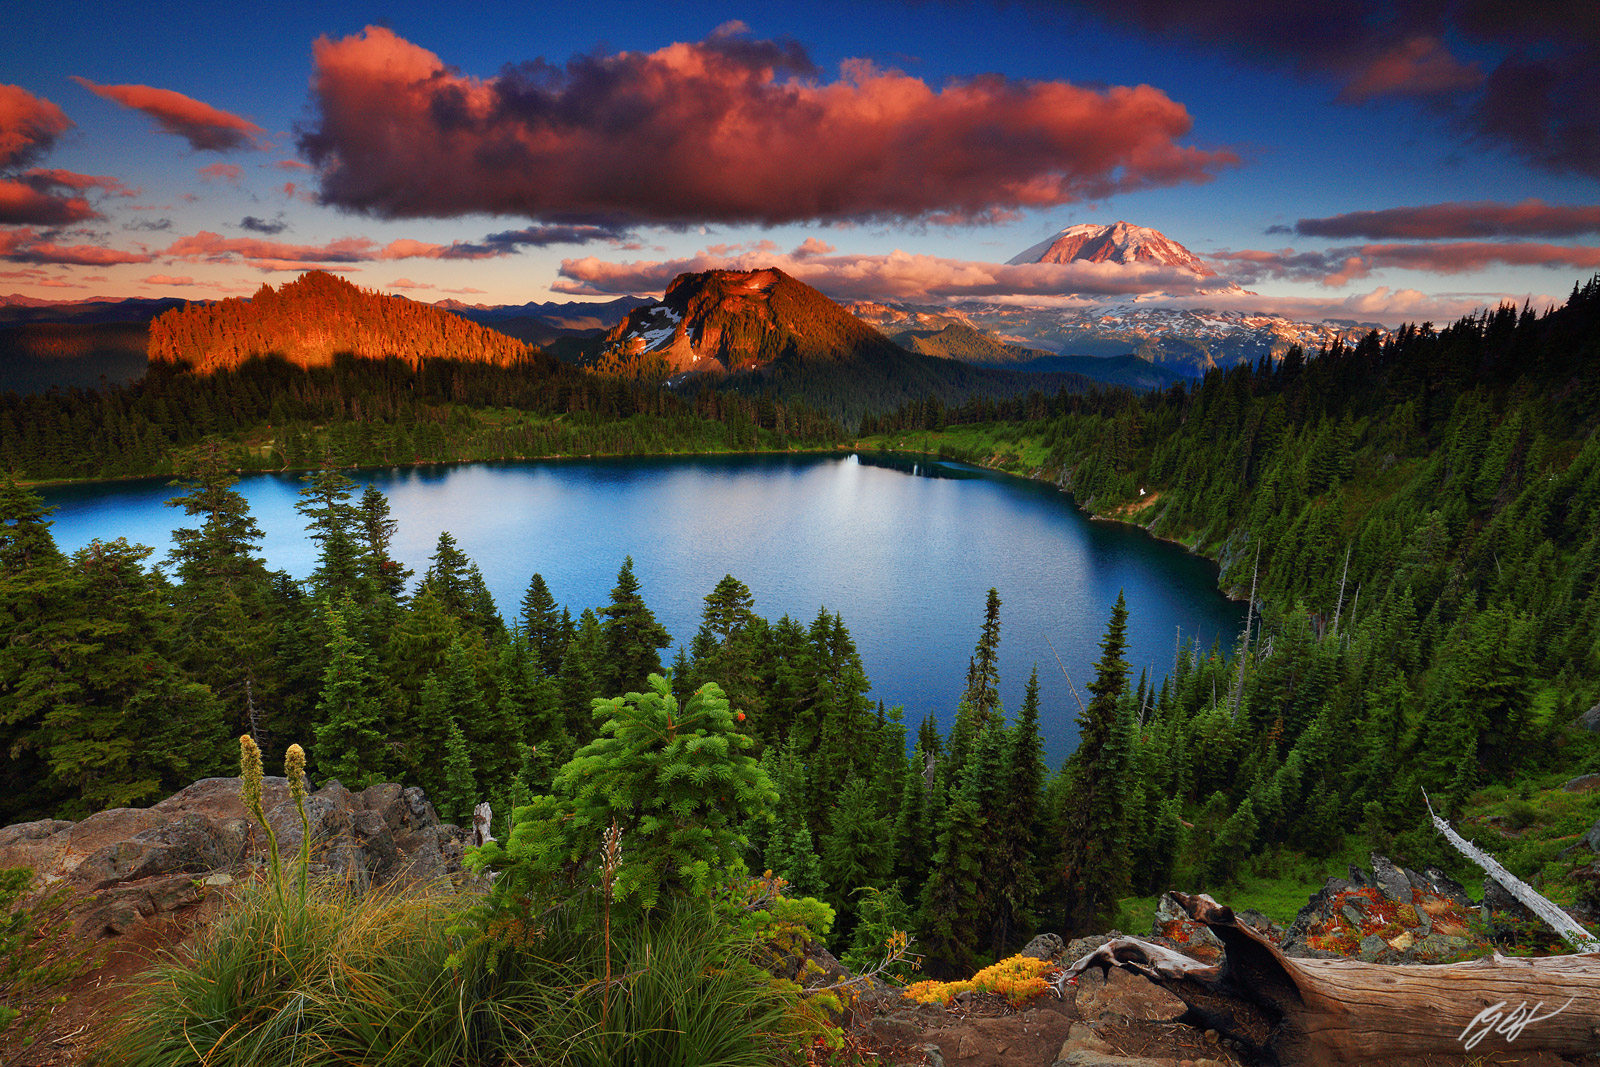 Sunset Mt Rainier and Summit Lake in the Clearwater Wilderness, Washington